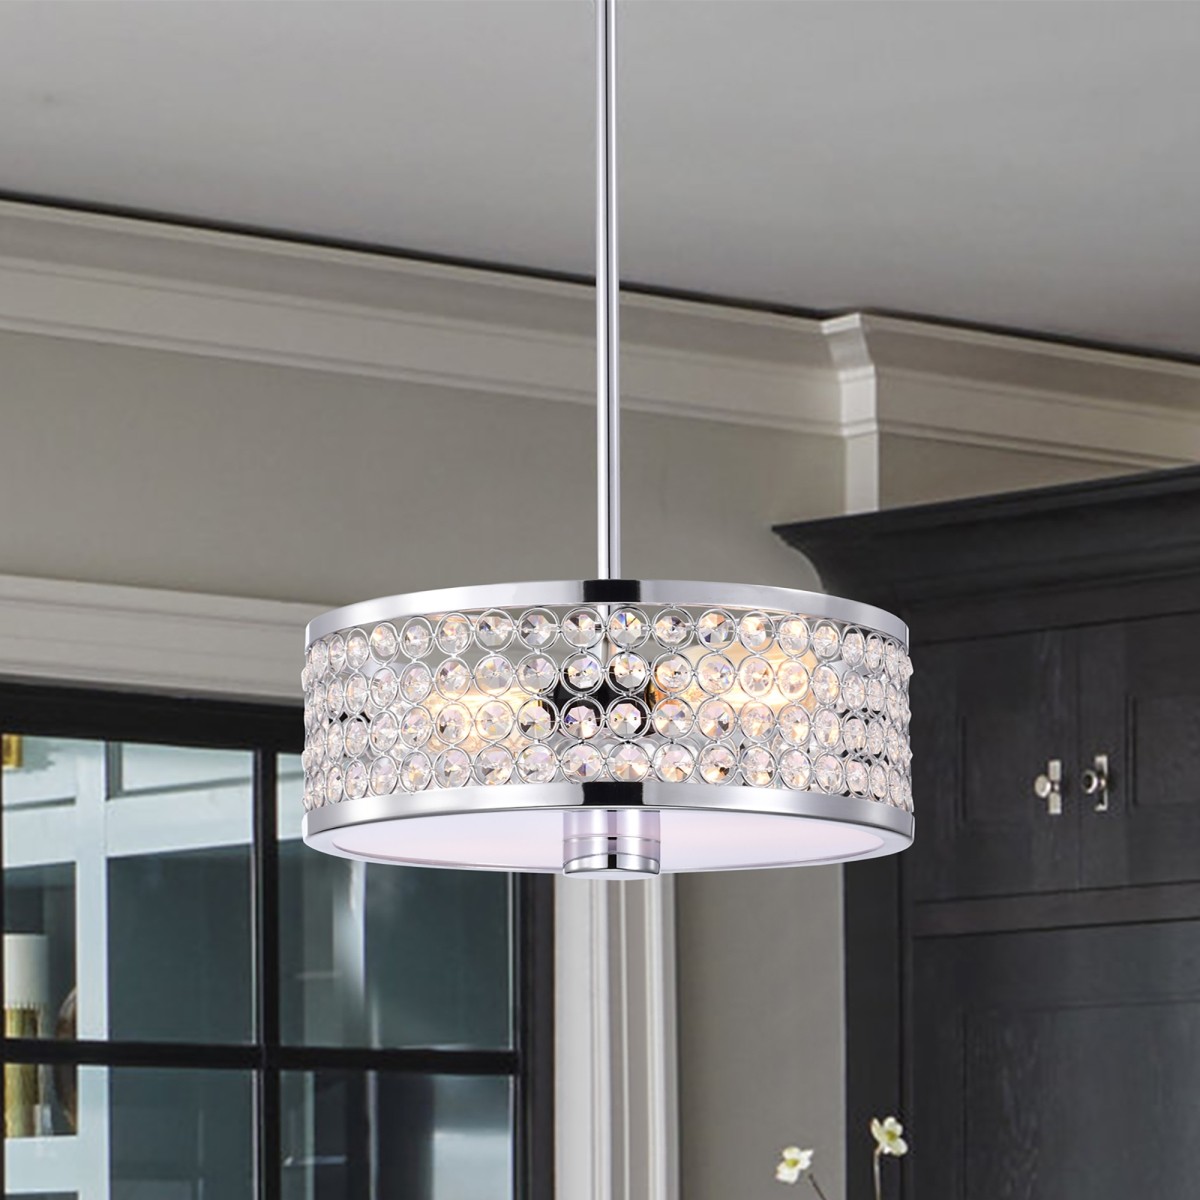 Eudocia 13 in. 2-Light Indoor Polished Chrome Finish Chandelier with Light Kit